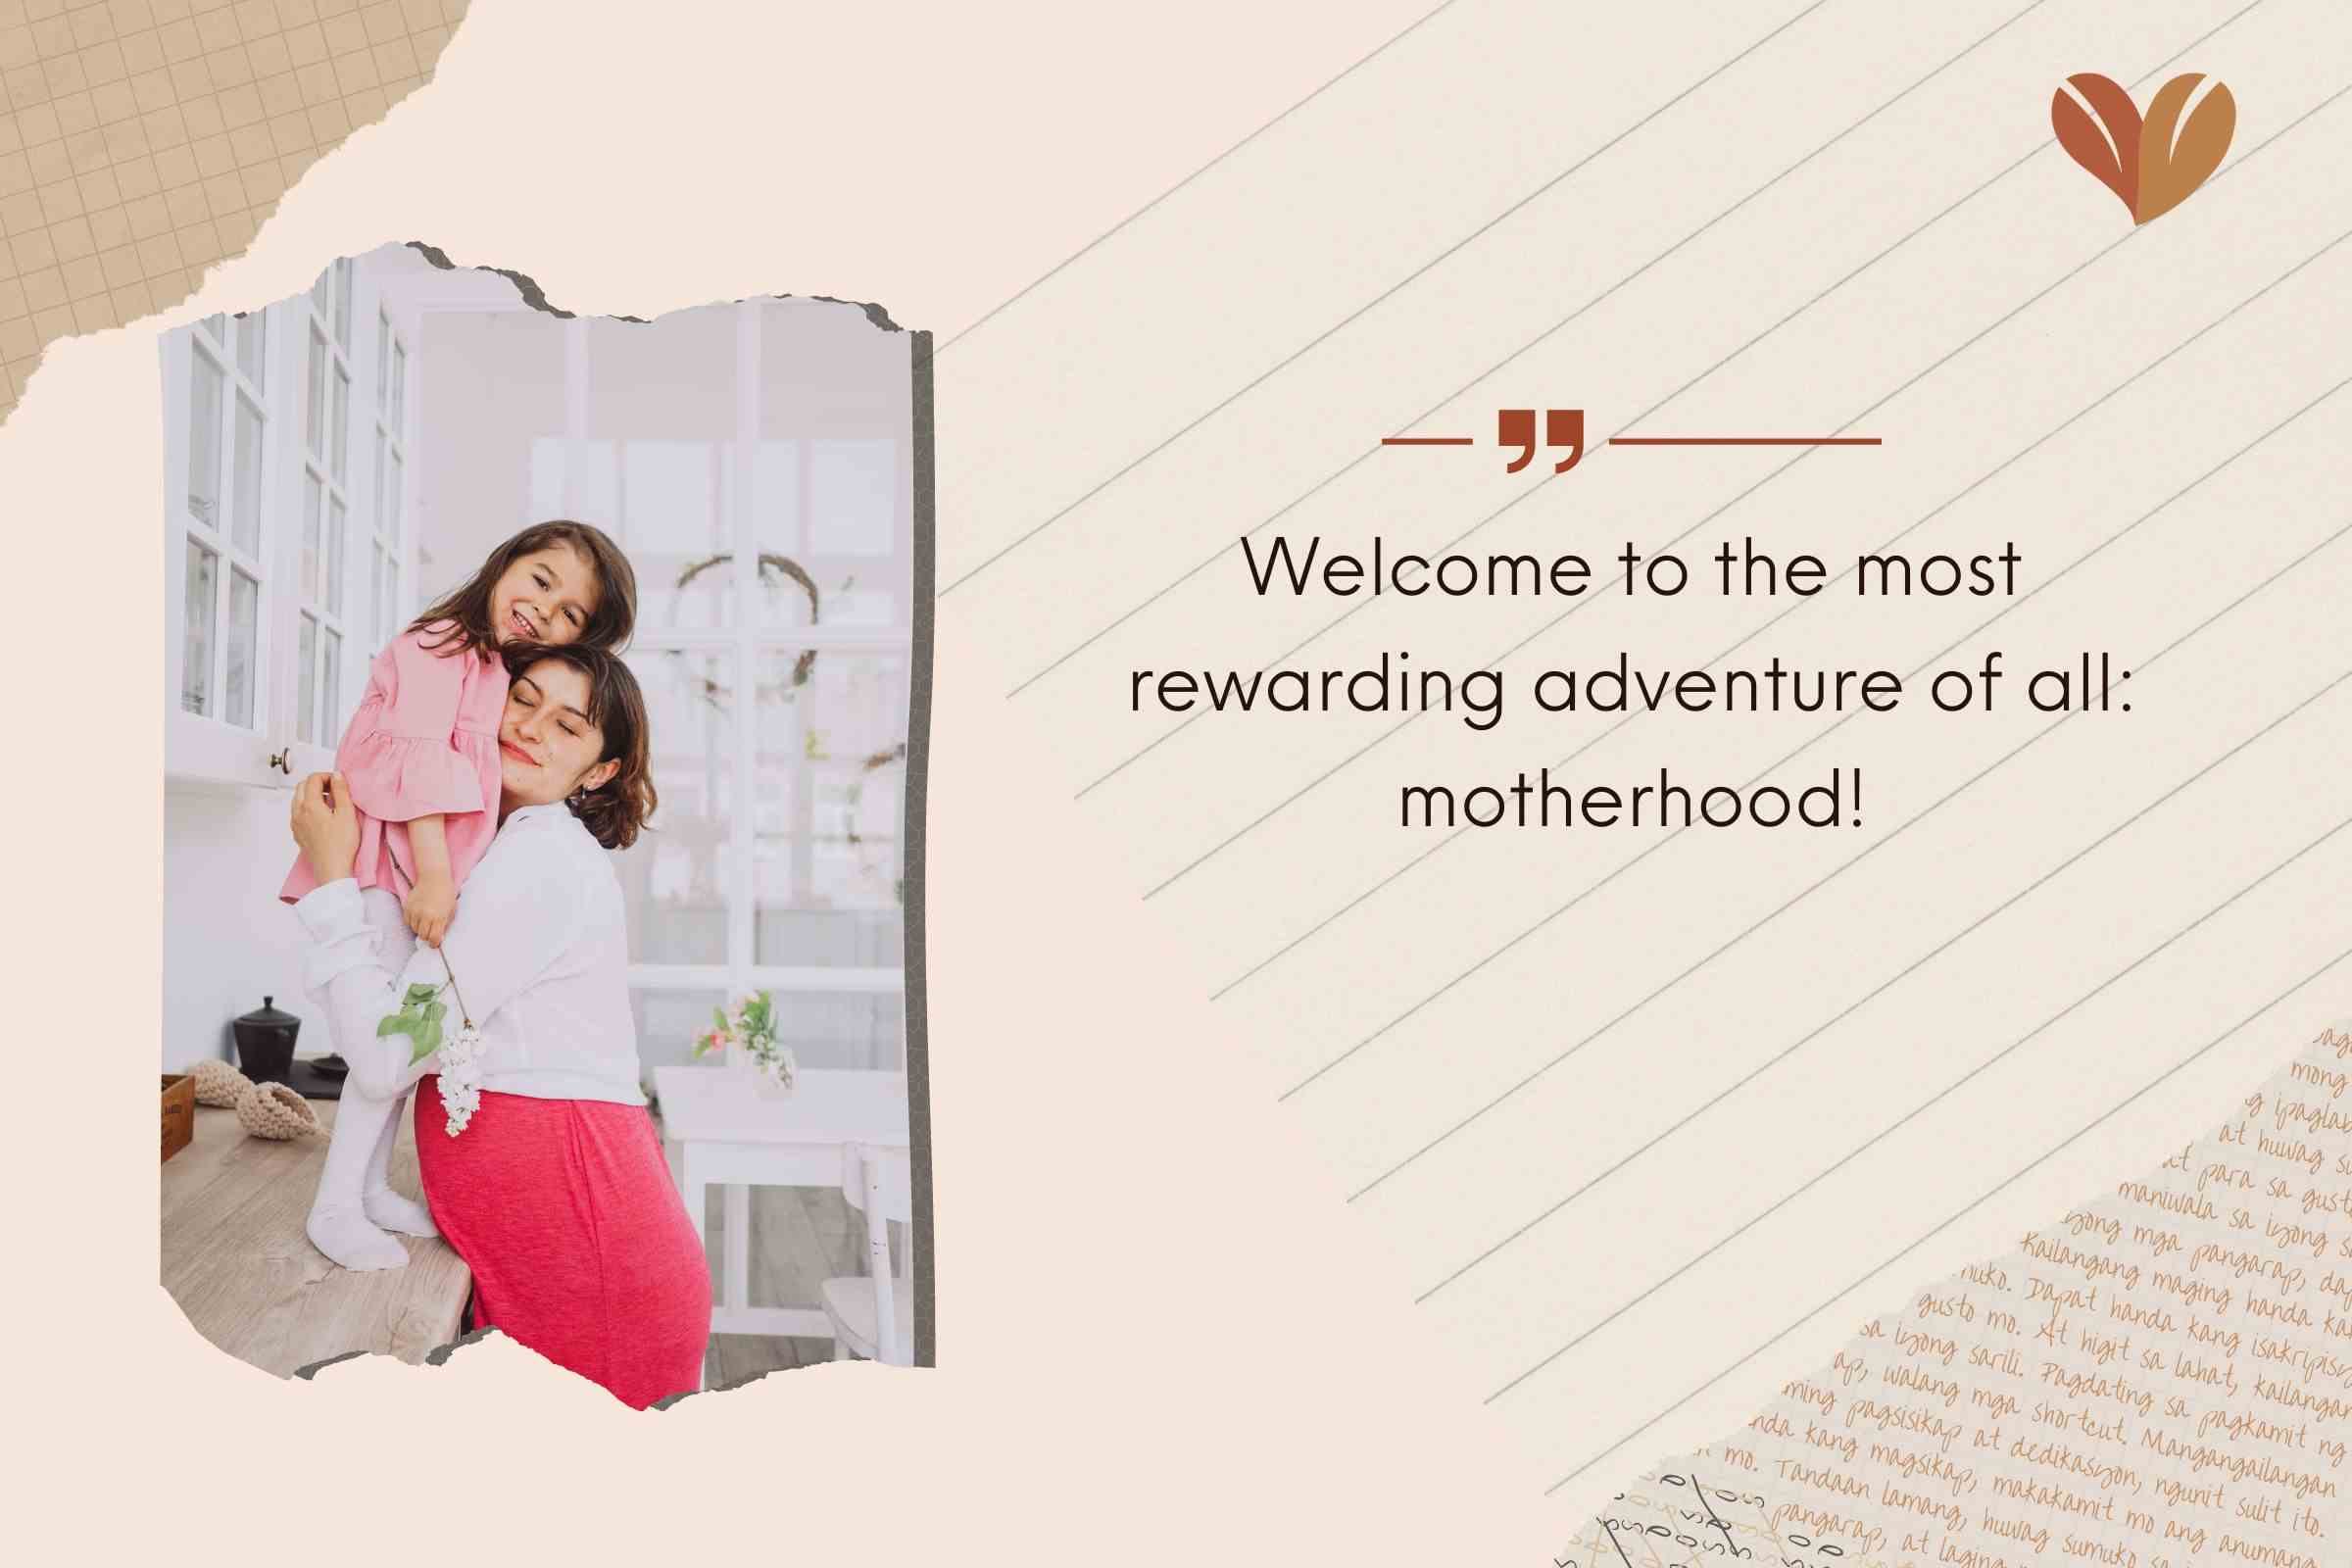 Happy First Mothers Day Message - Welcome to the most rewarding adventure of all: motherhood!